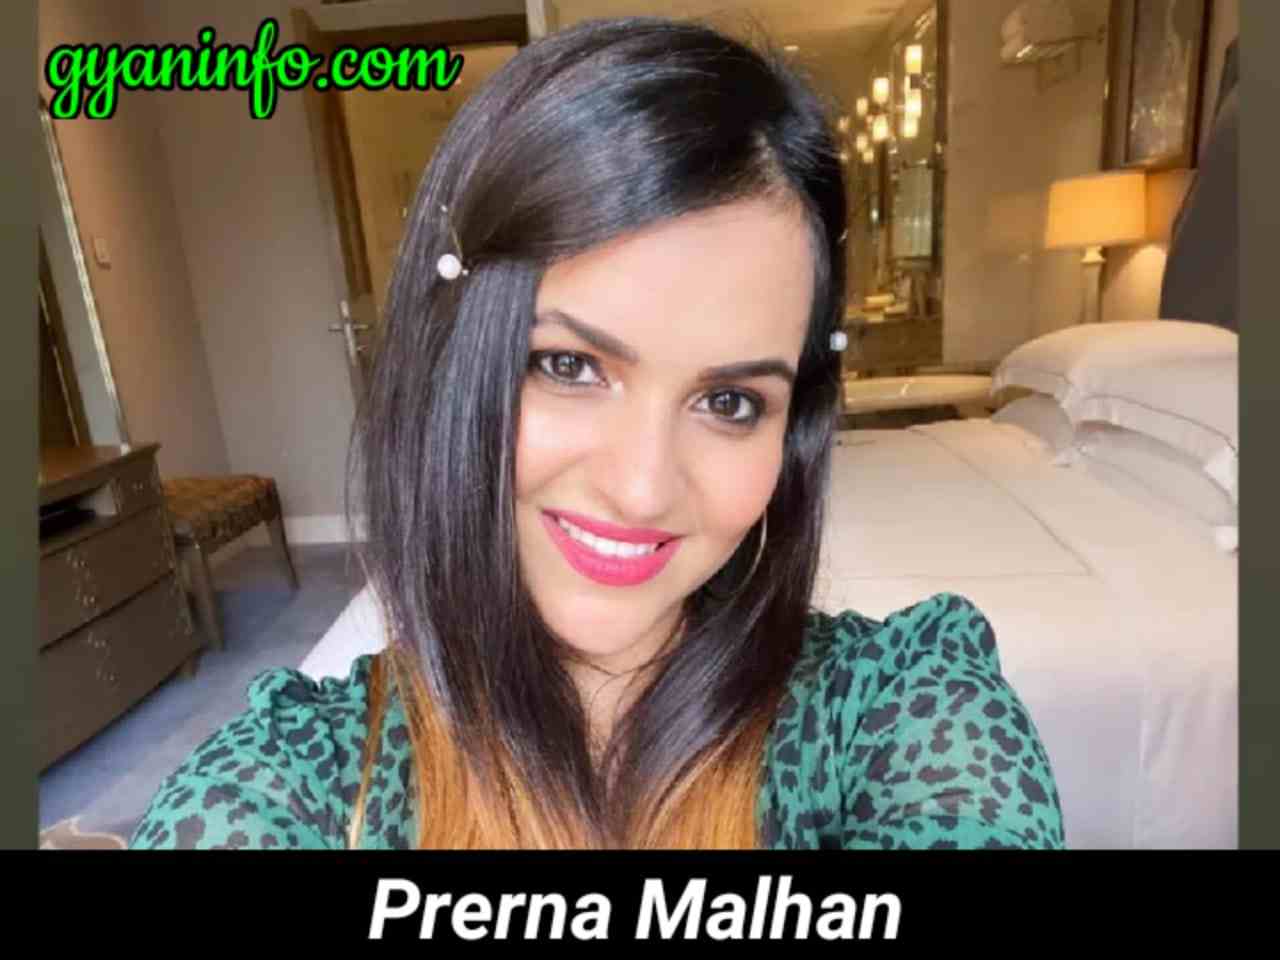 Prerna Malhan (Wanderers Hub) Biography, Height, Age, Weight, Body Measurements, Boyfriend, Family, Parents, Net Worth, Wiki & More